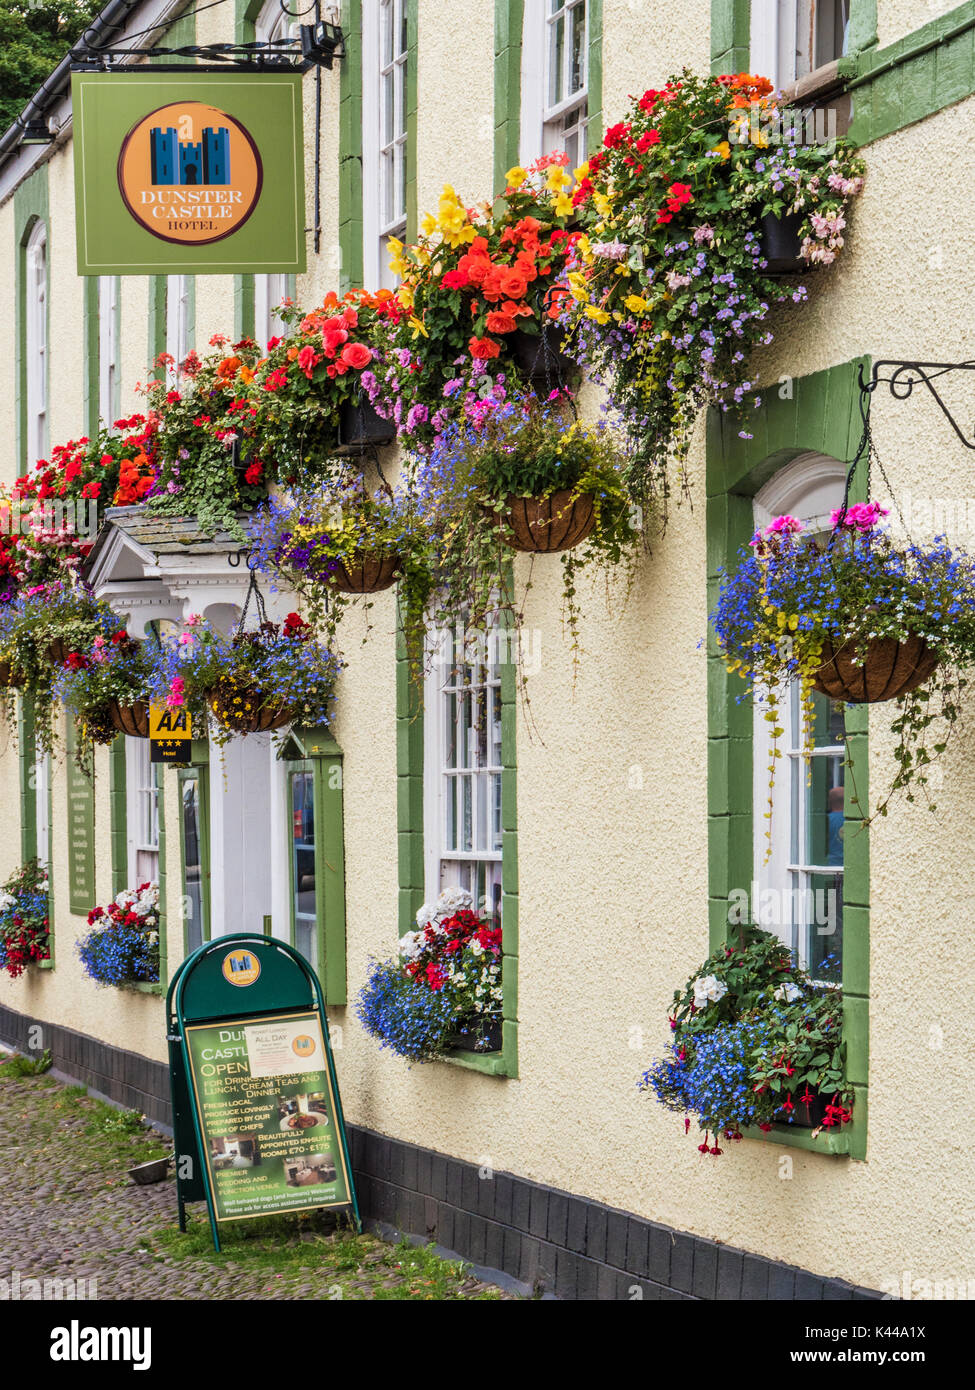 The Dunster Castle Hotel in Dunster near Minehead, Somerset. Stock Photo